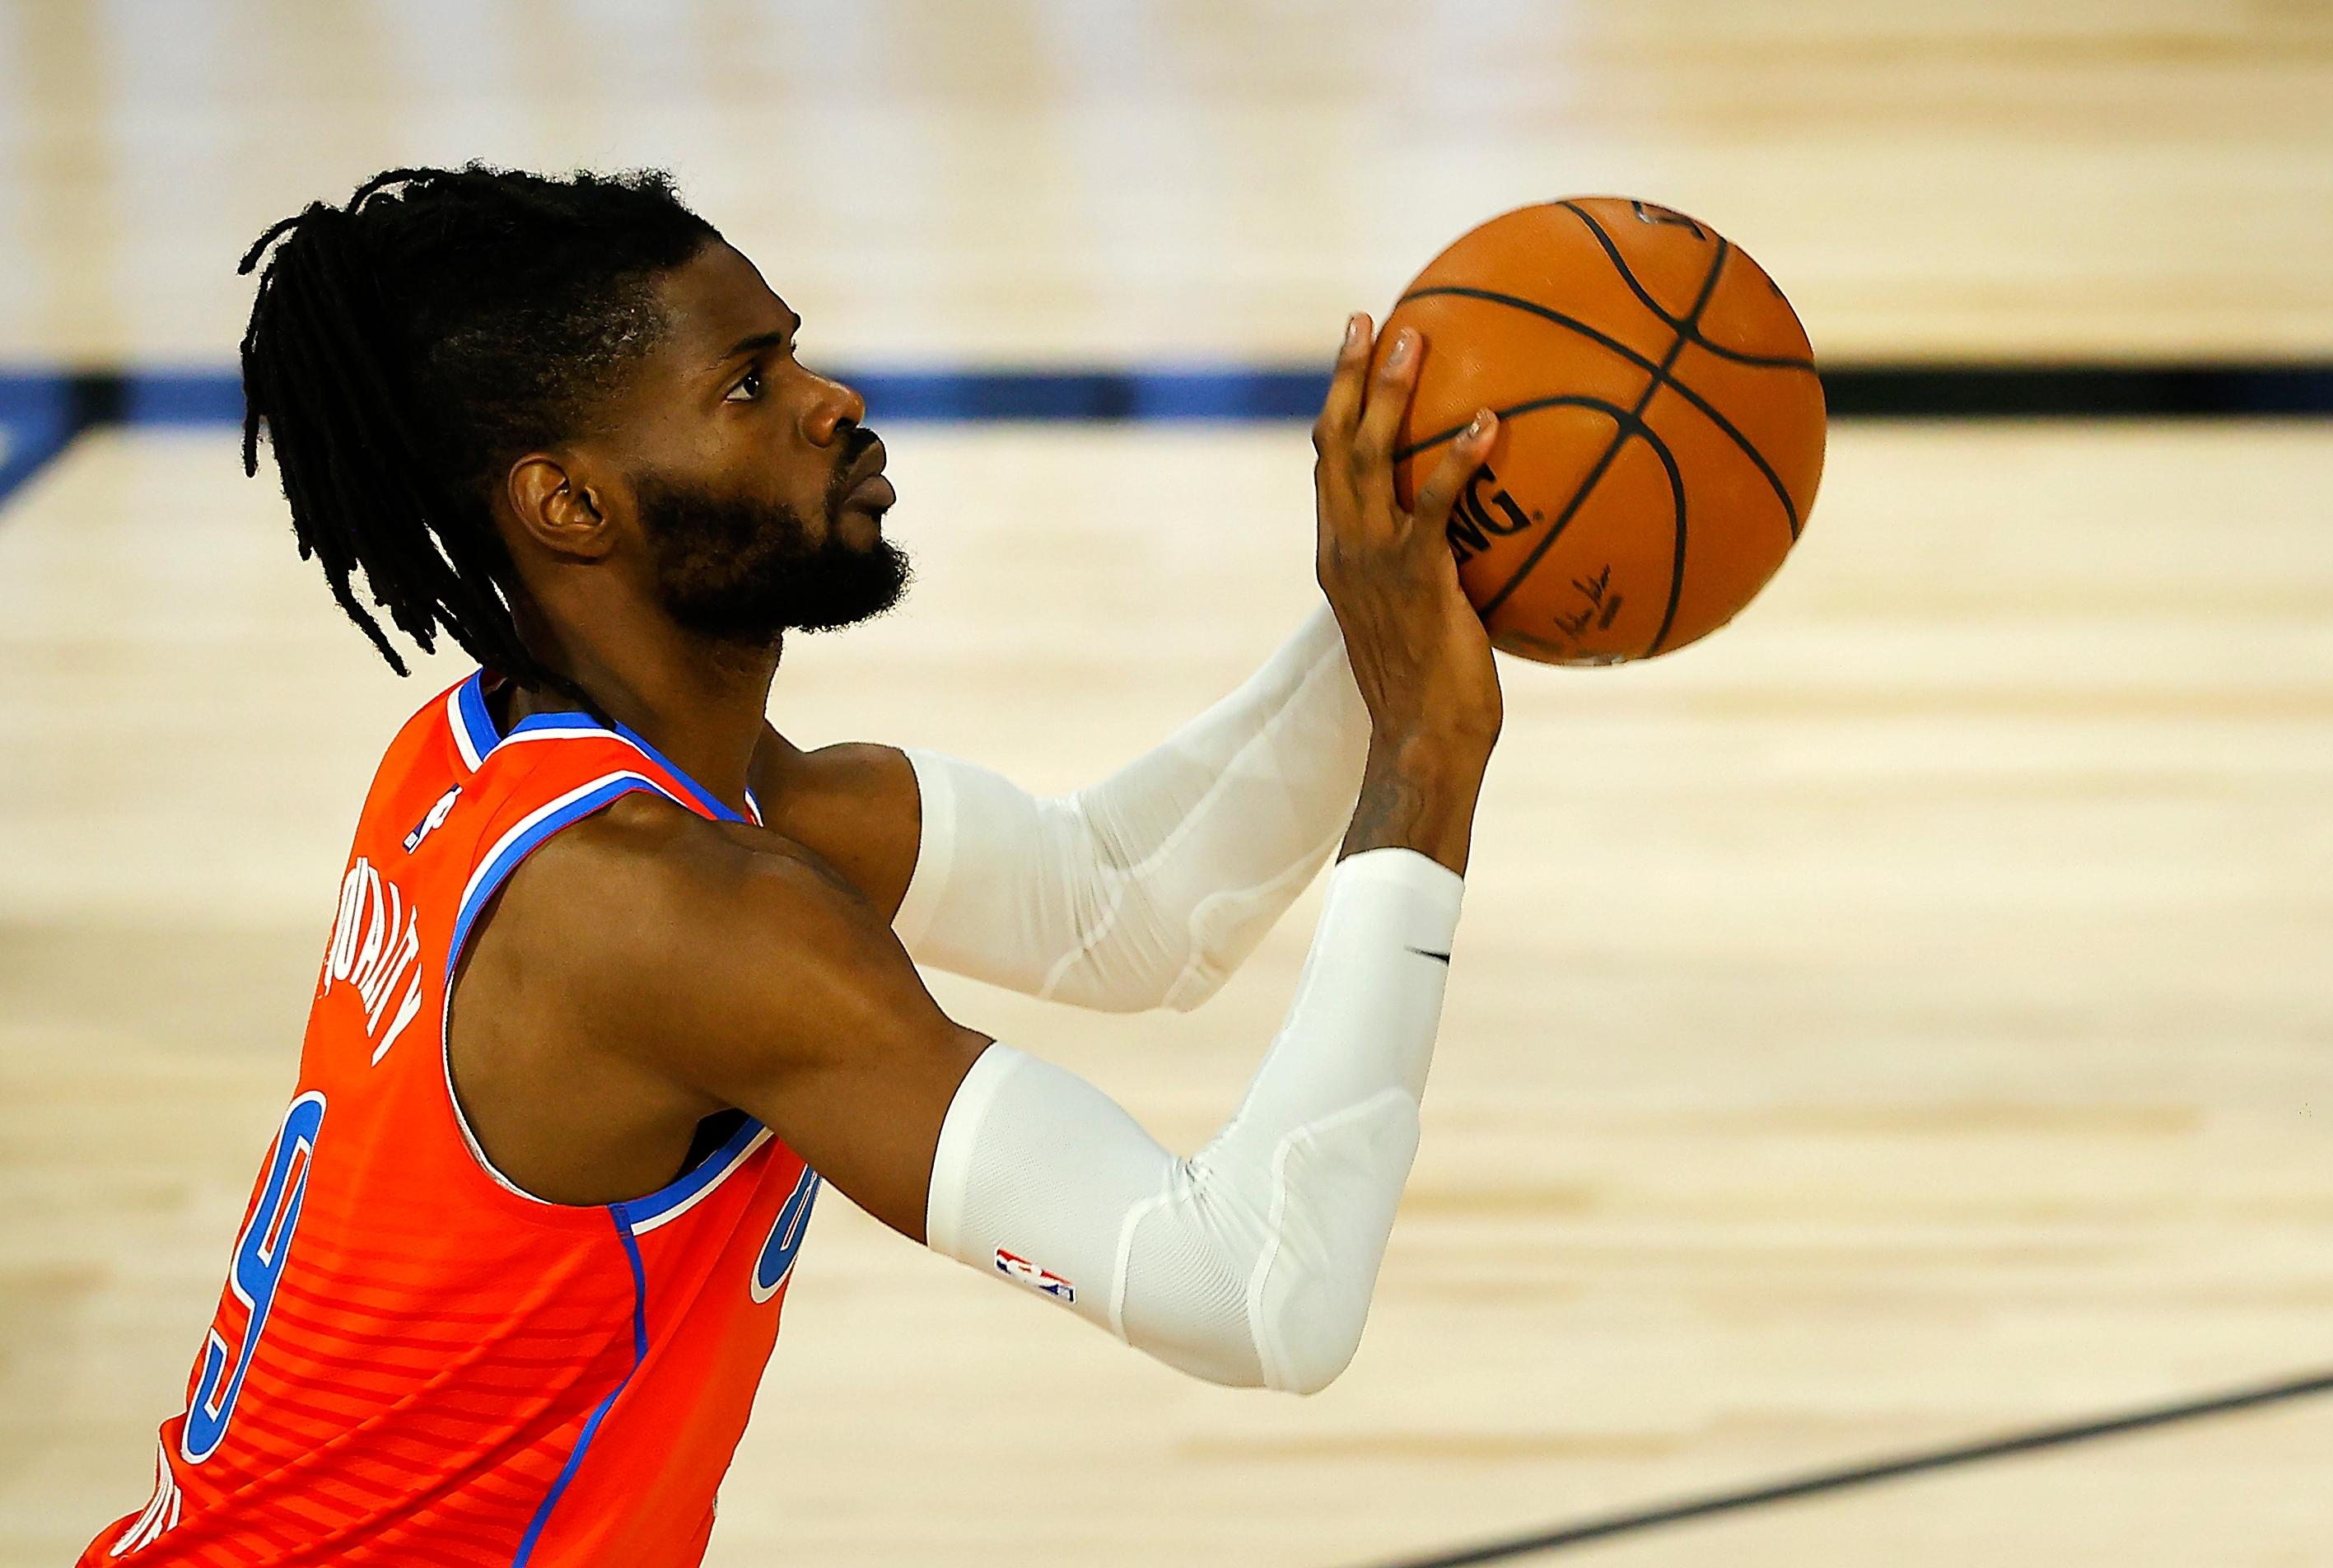 Aug 14, 2020; Lake Buena Vista, Florida, USA; Nerlens Noel #9 of the Oklahoma City Thunder shoots the ball during the first quarter against the LA Clippers at The Field House at ESPN Wide World of Sports Complex / Mike Ehrmann/Pool Photo-USA TODAY Sports